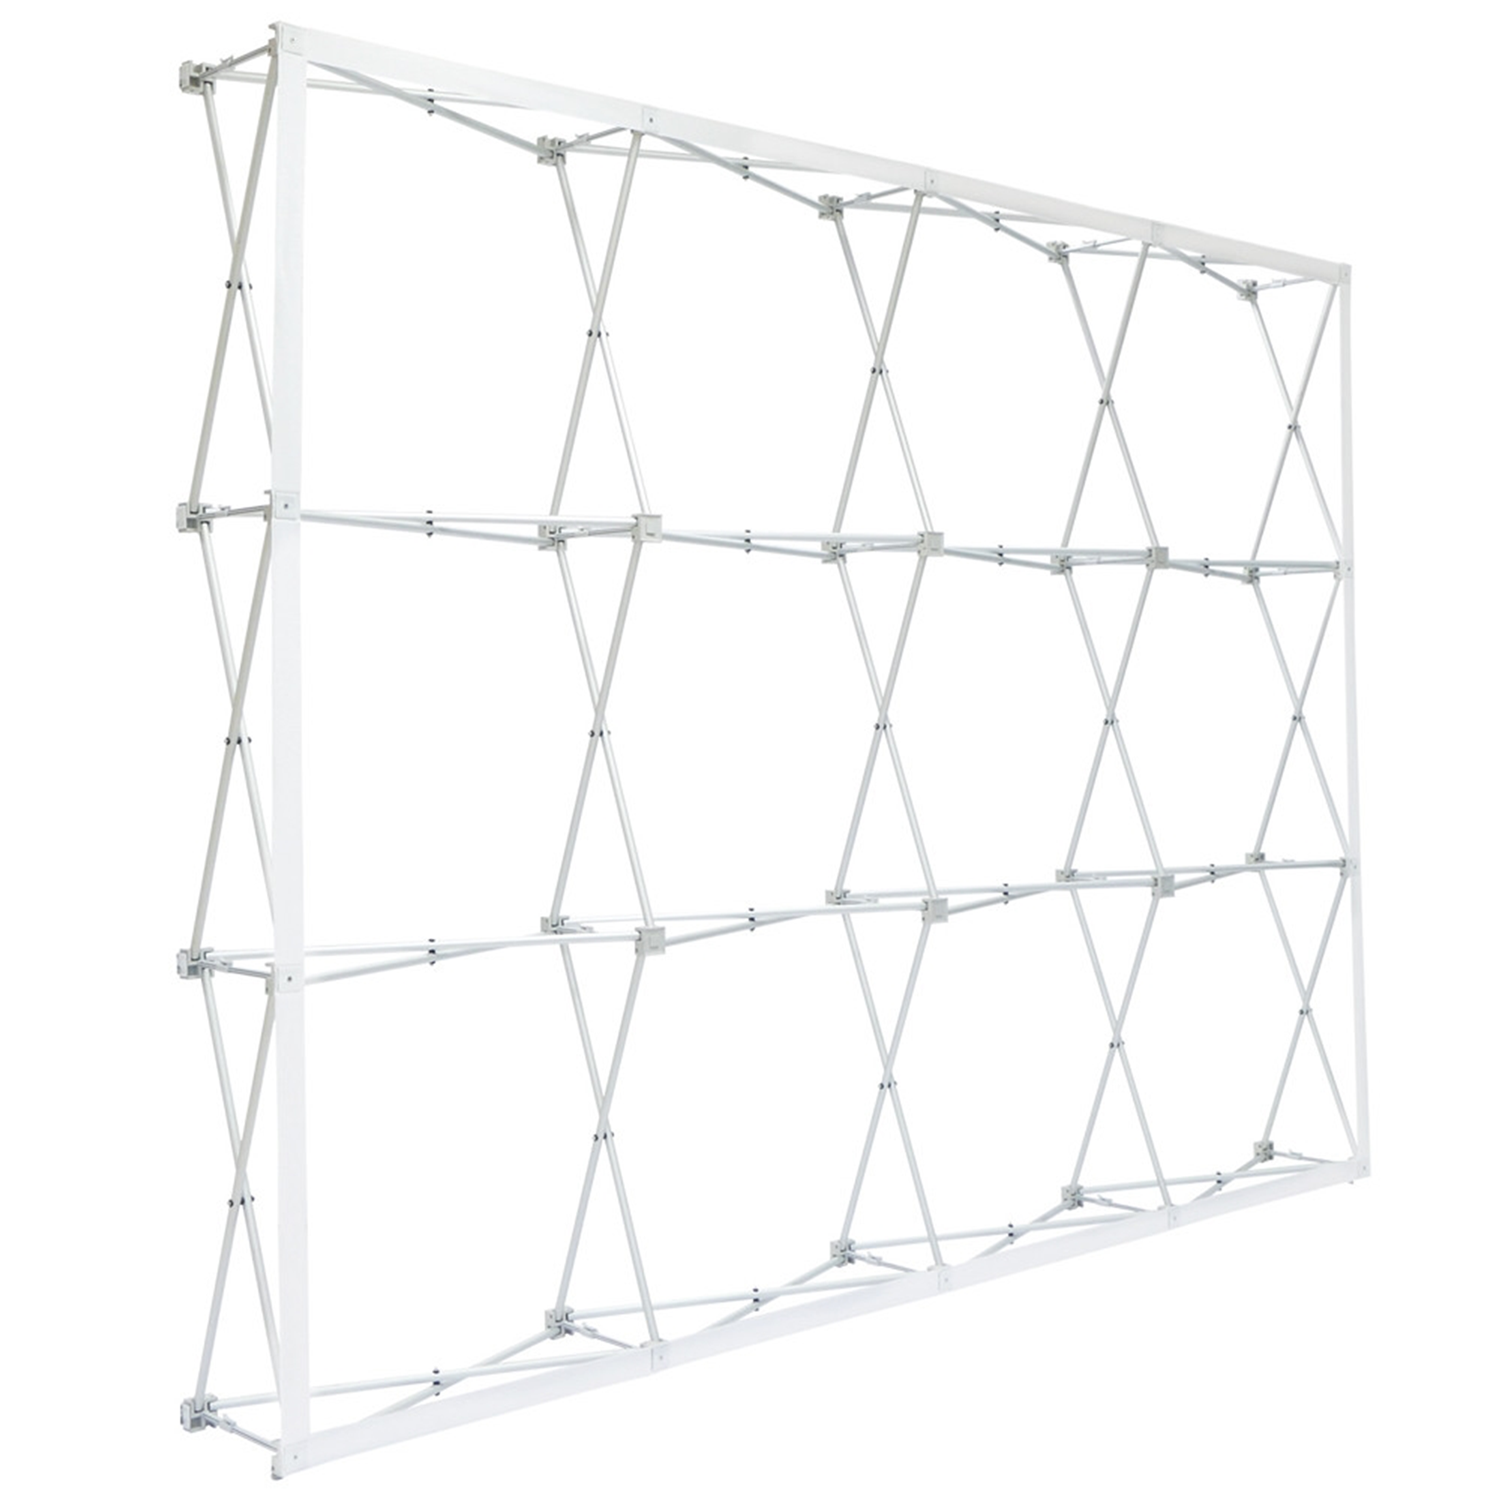 Pop-up structure with straight and angled bars